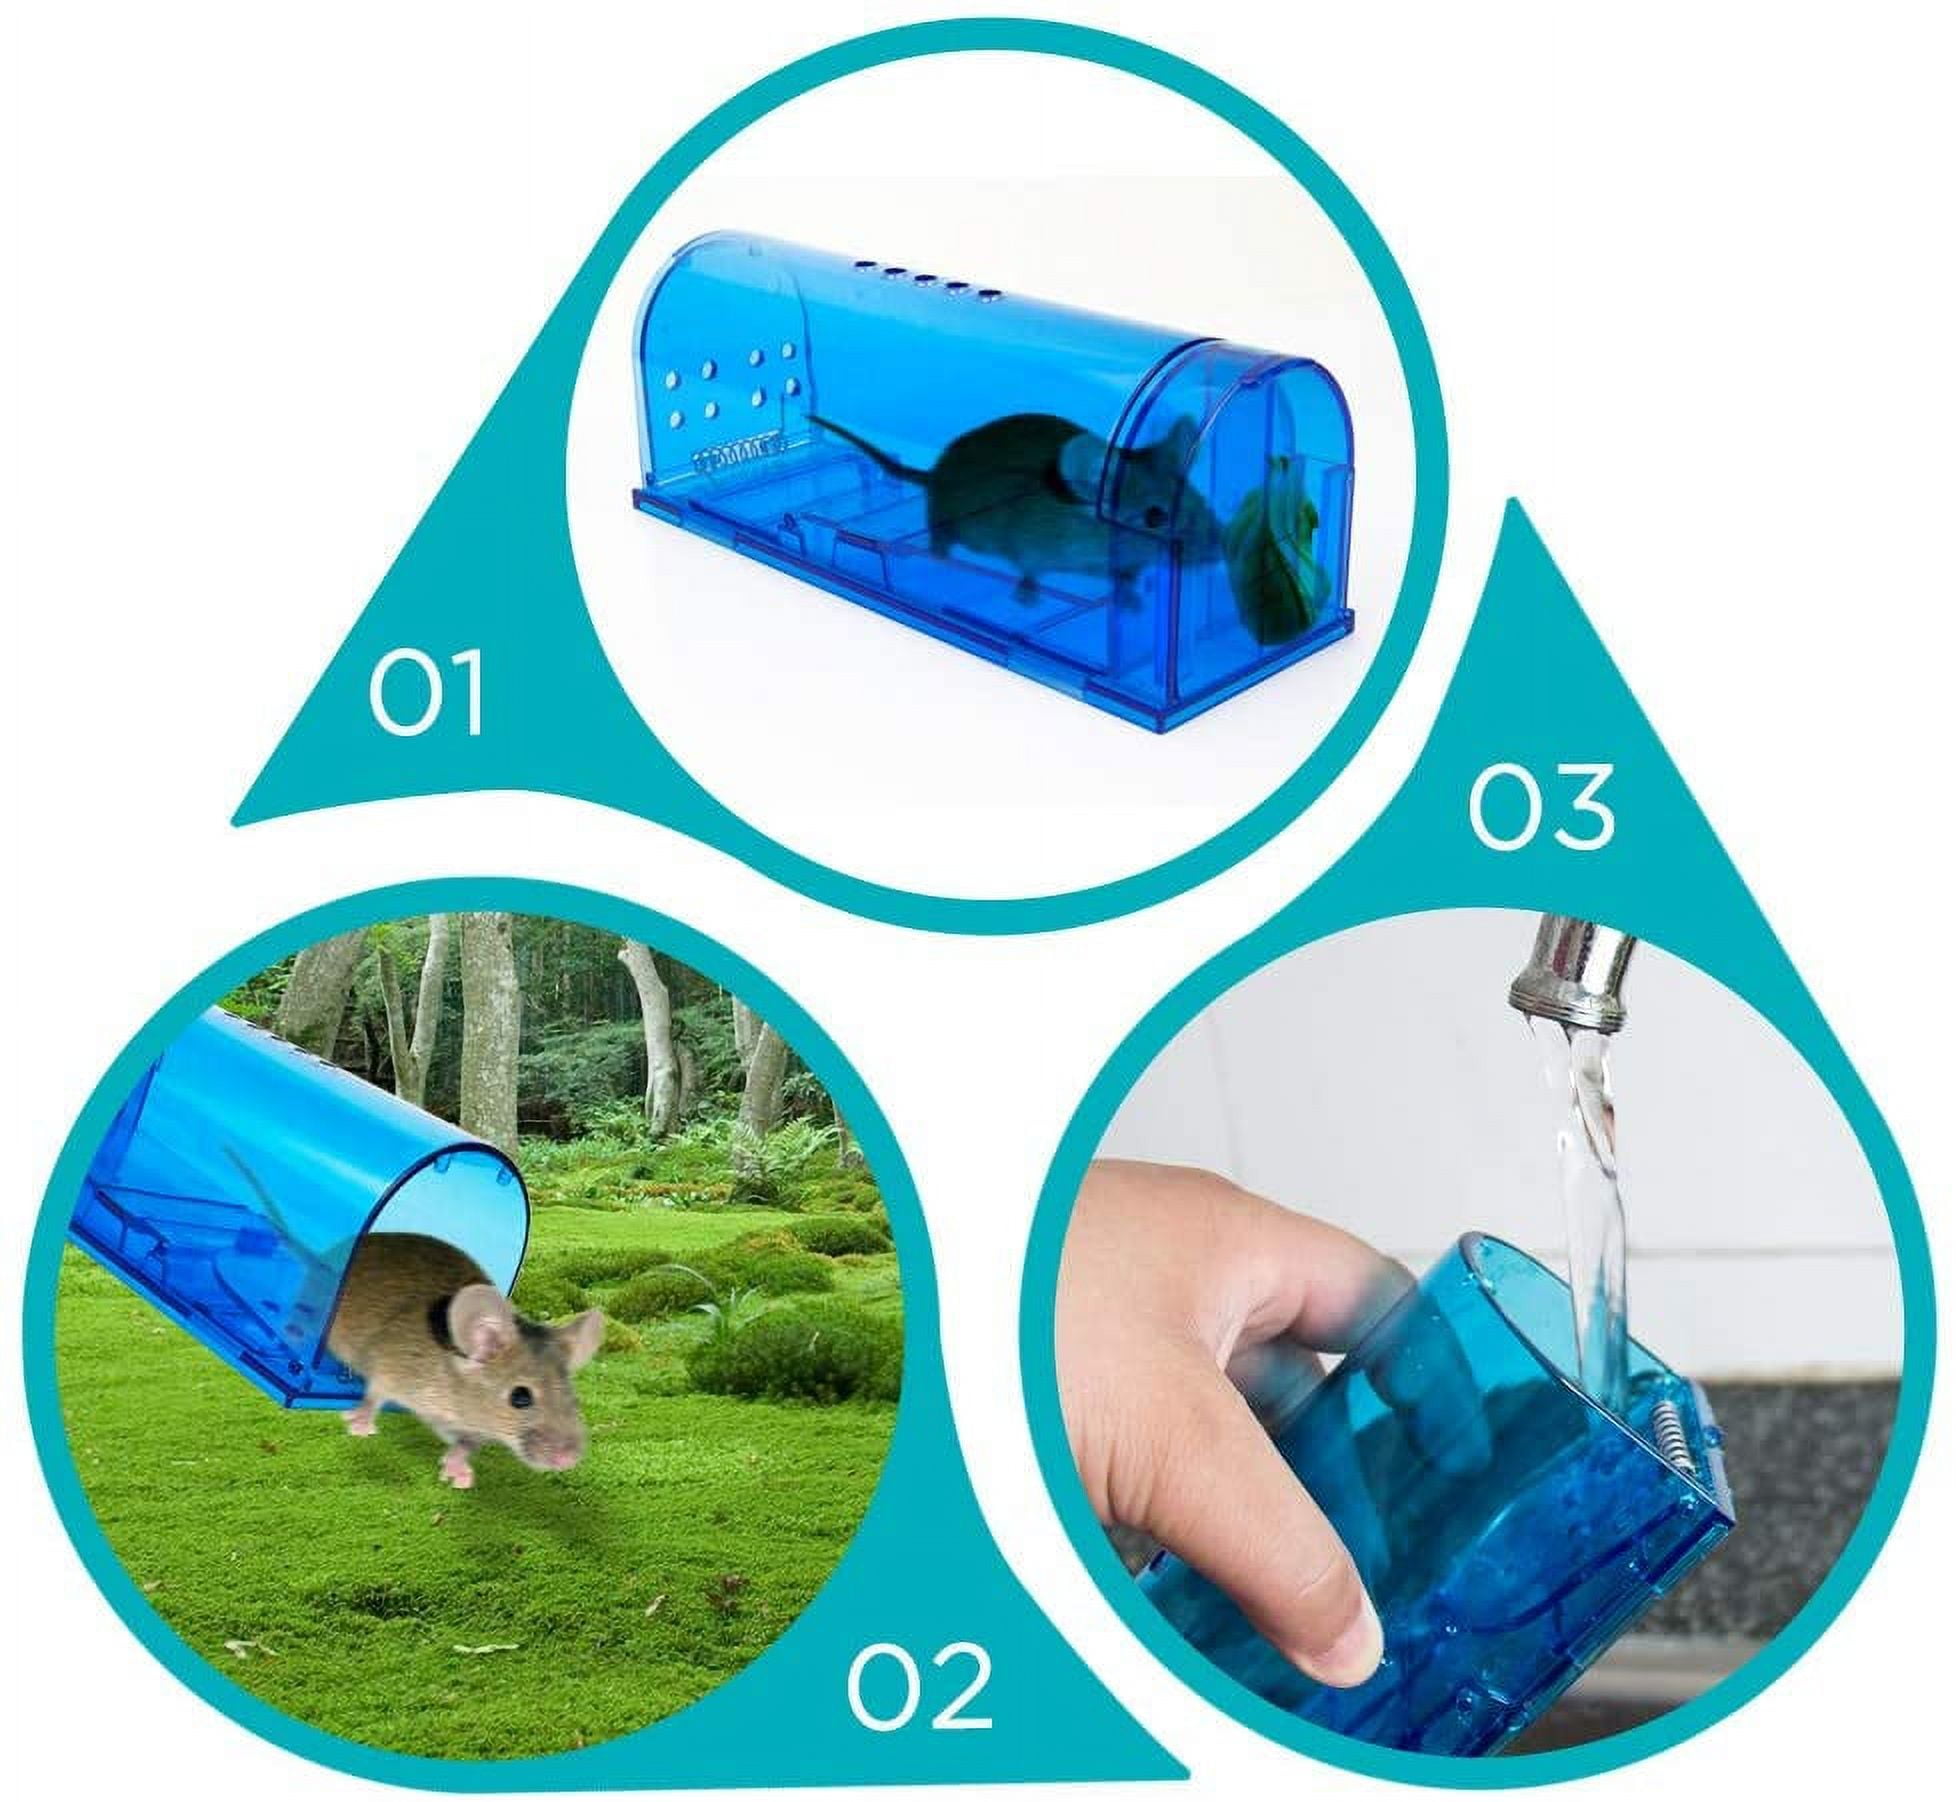  lllteri Humane Mouse Traps, Catch& Release, Reusable Rat Traps,  Easy to Set and Safe for Family and Pets, No Kill for Small  Rodent/Voles/Hamsters/Moles, Catcher That Works for Indoor/Outdoor, 4 Pack 